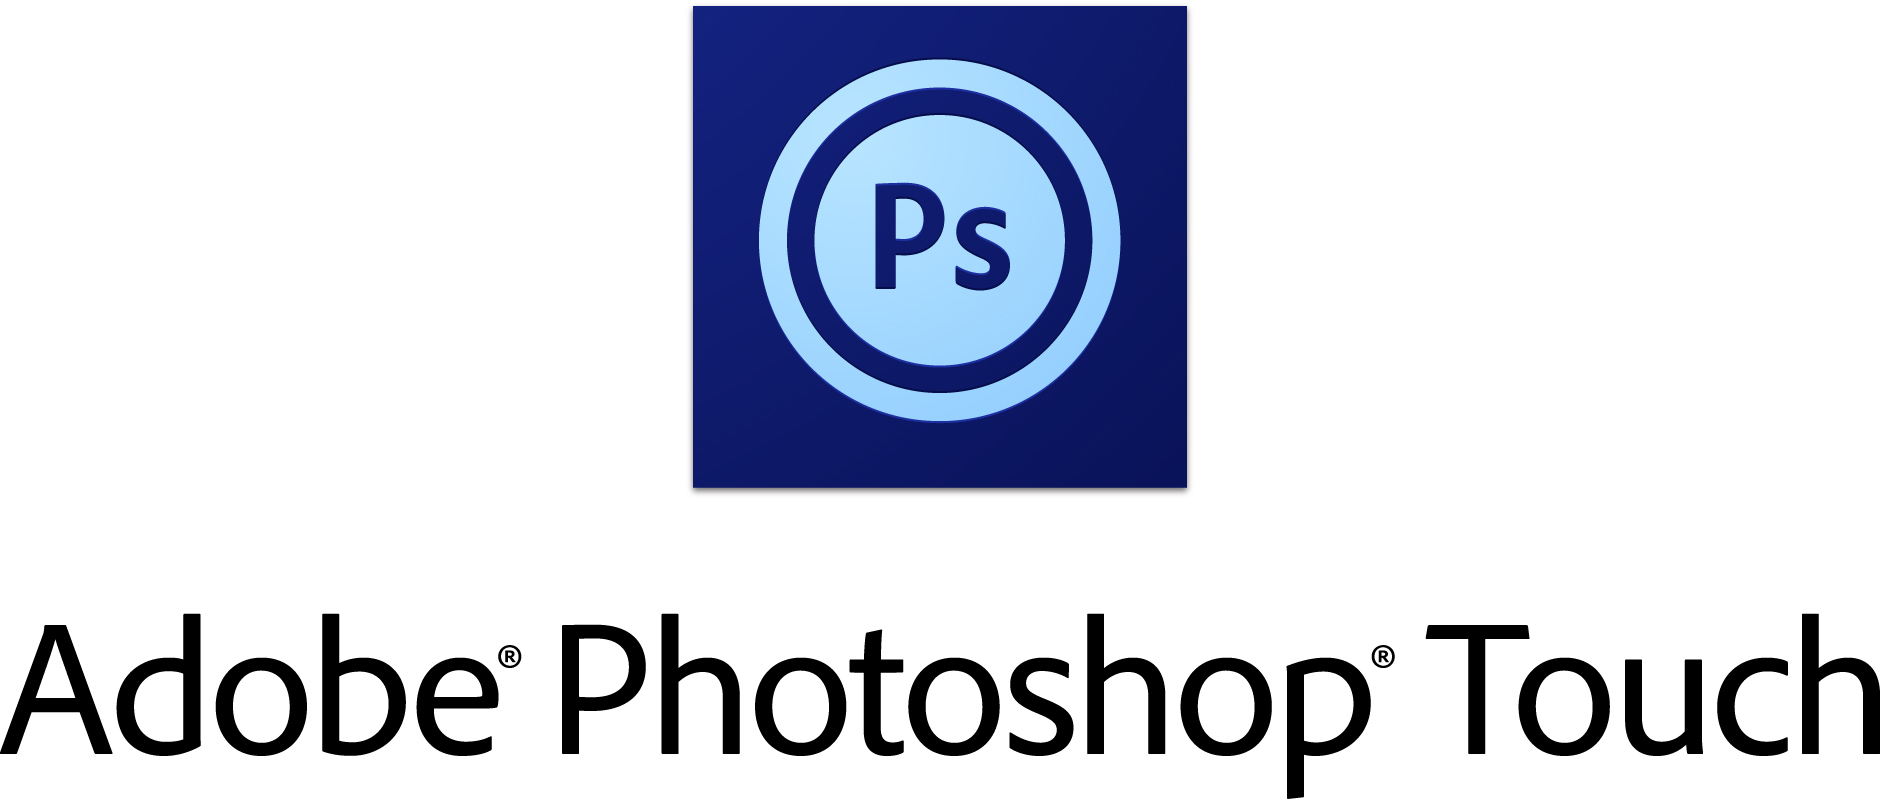 Adobe photoshop cs5 free download and install